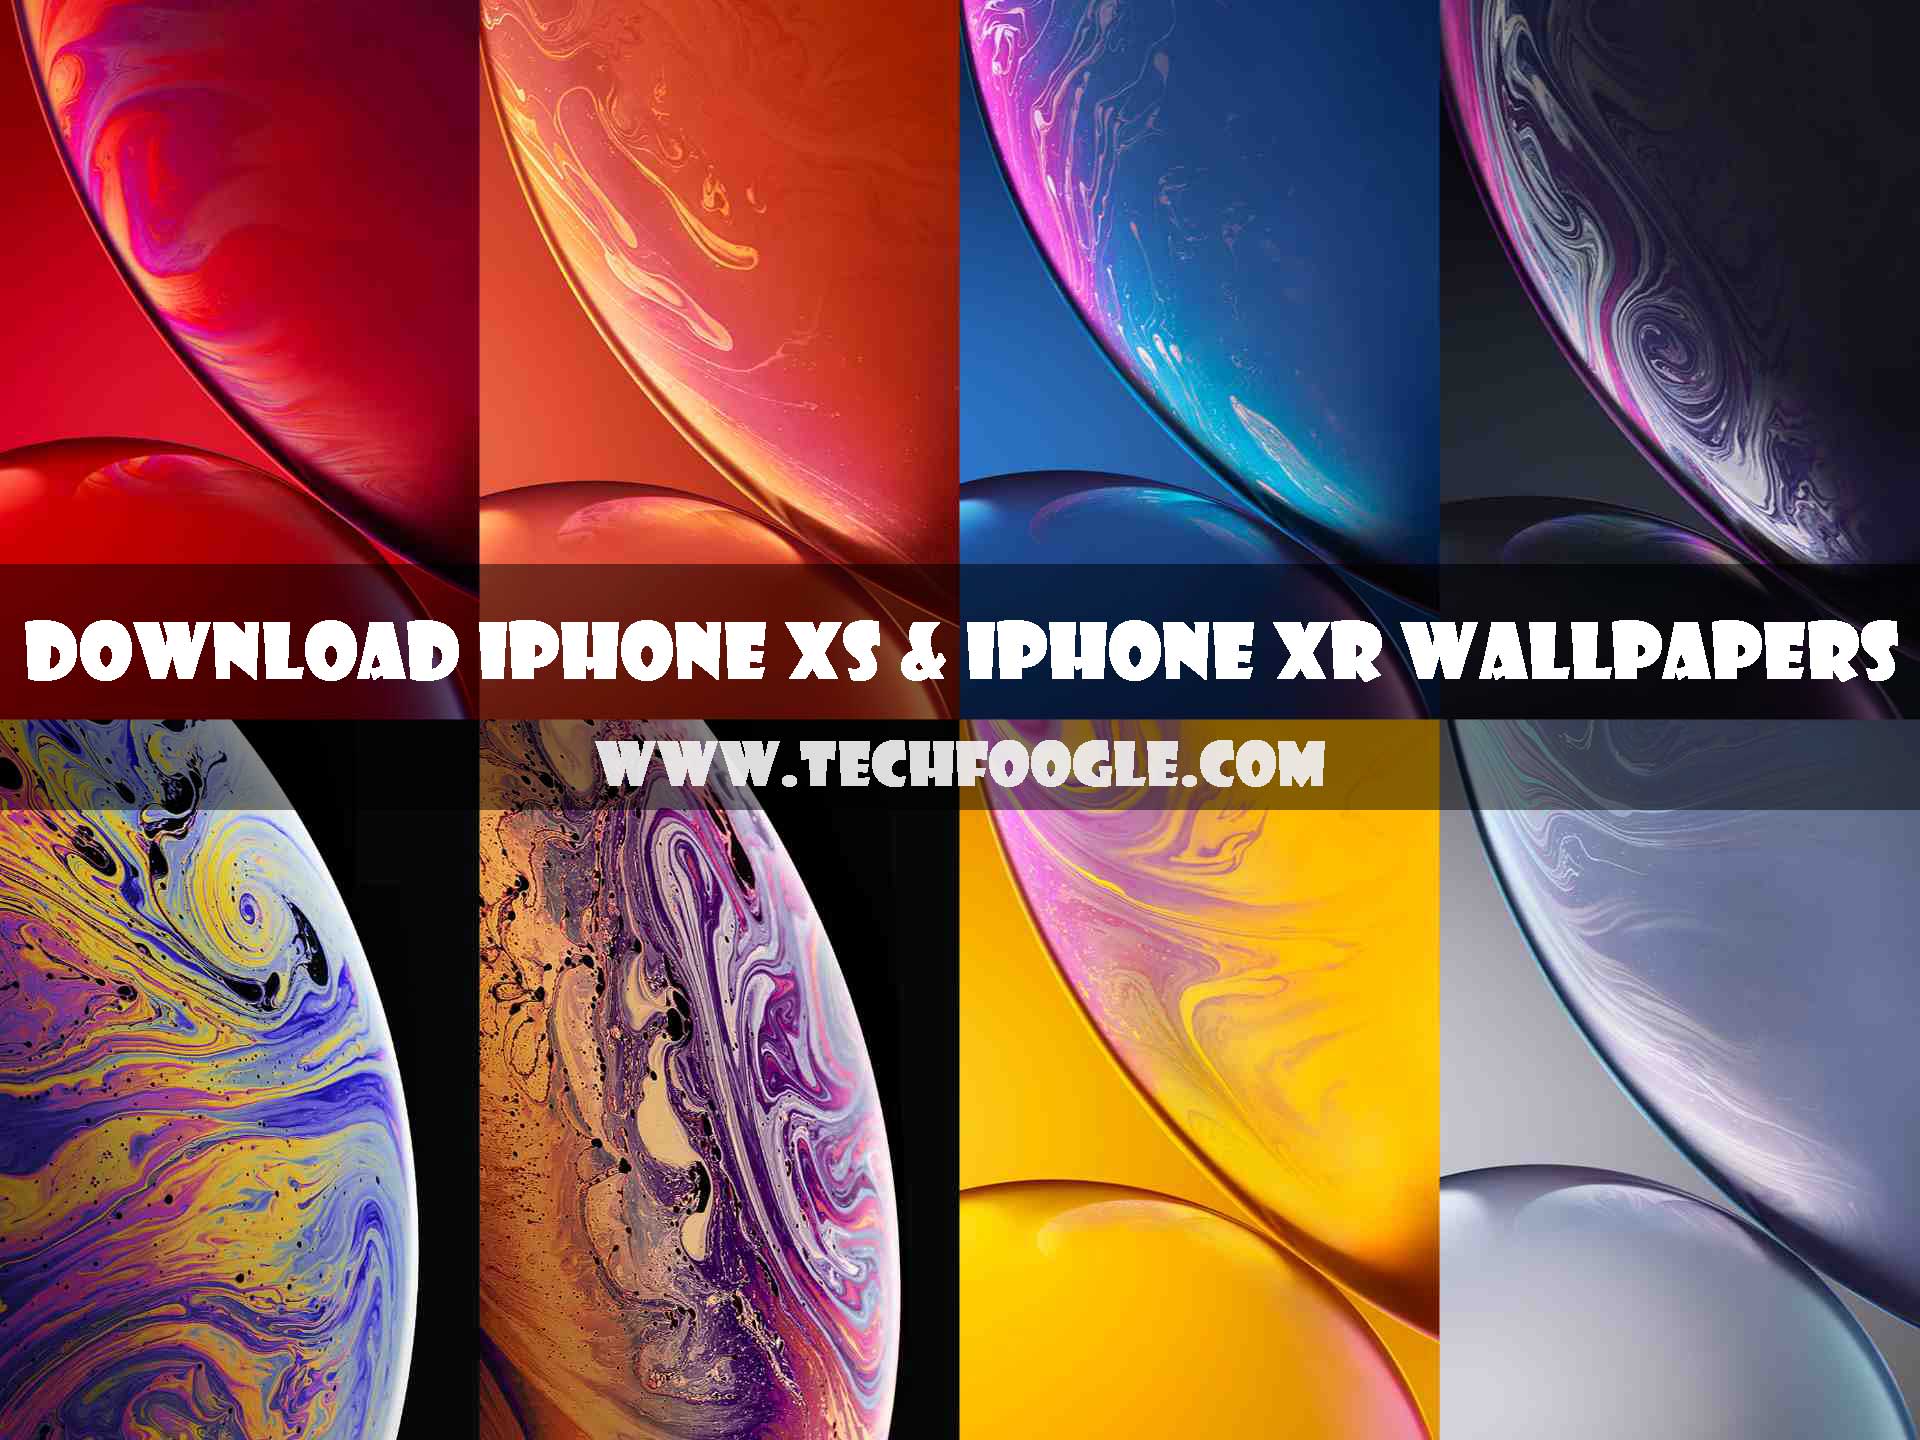 Wallpaper ID: 70407 / ios 13, apple, iphone xs max, iphone xs, iphone x, iphone  xr, computer, original, hd, 4k, abstract free download